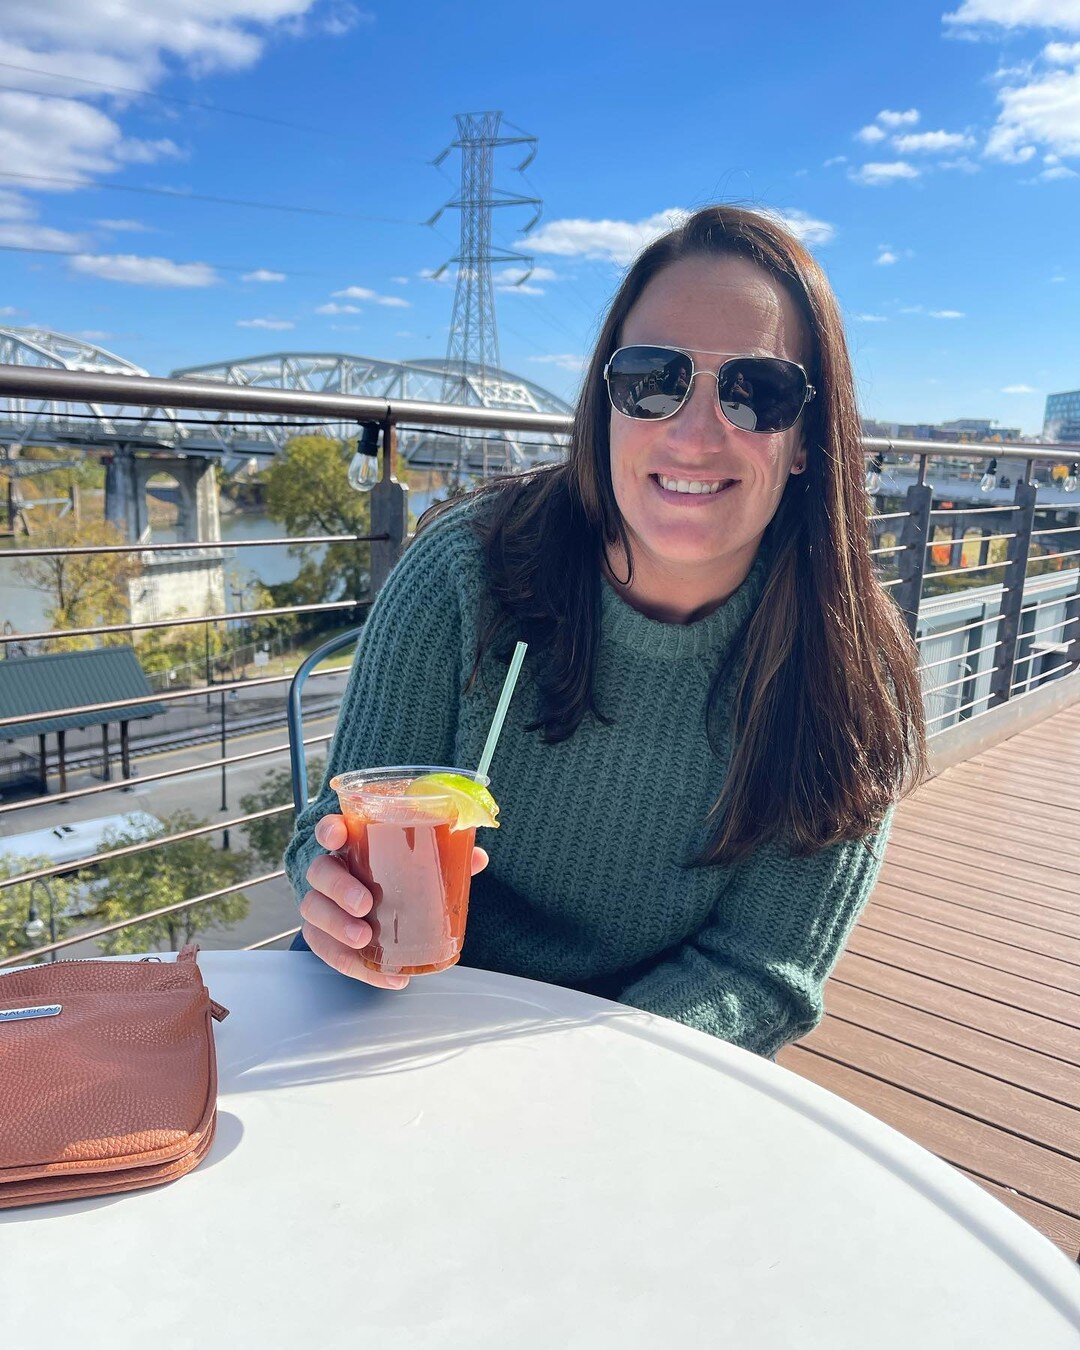 It's Brunch time! Perfect weather for Bloody Marys on the rooftop ☀️ 

Can't make it to Acme? We've got our Rooster Juice online to order and make your drink at home!

📸 : @jennd9782
-------
#nashville #nashvilletn #brunchnashville #rooftopnashville